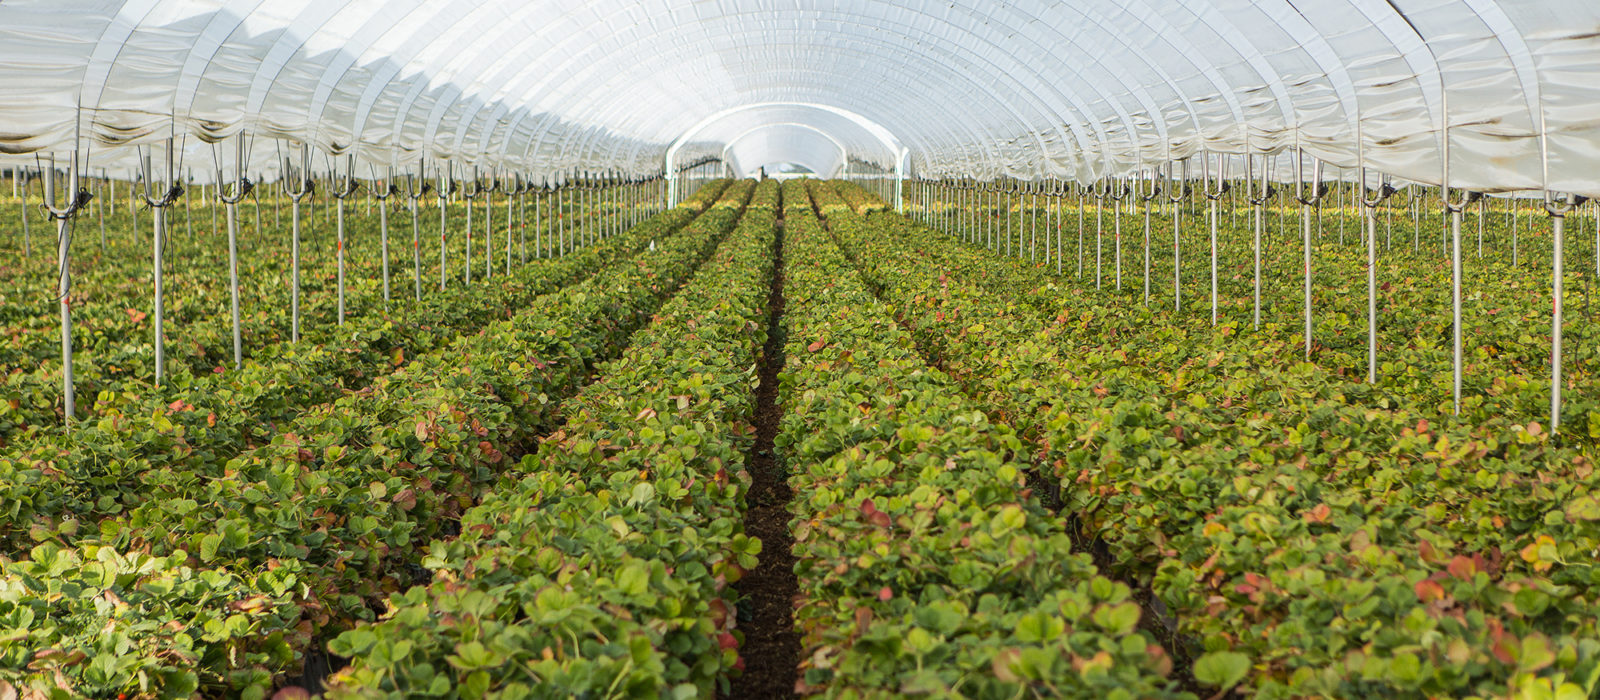 Rows of berry plants in a large enclosure